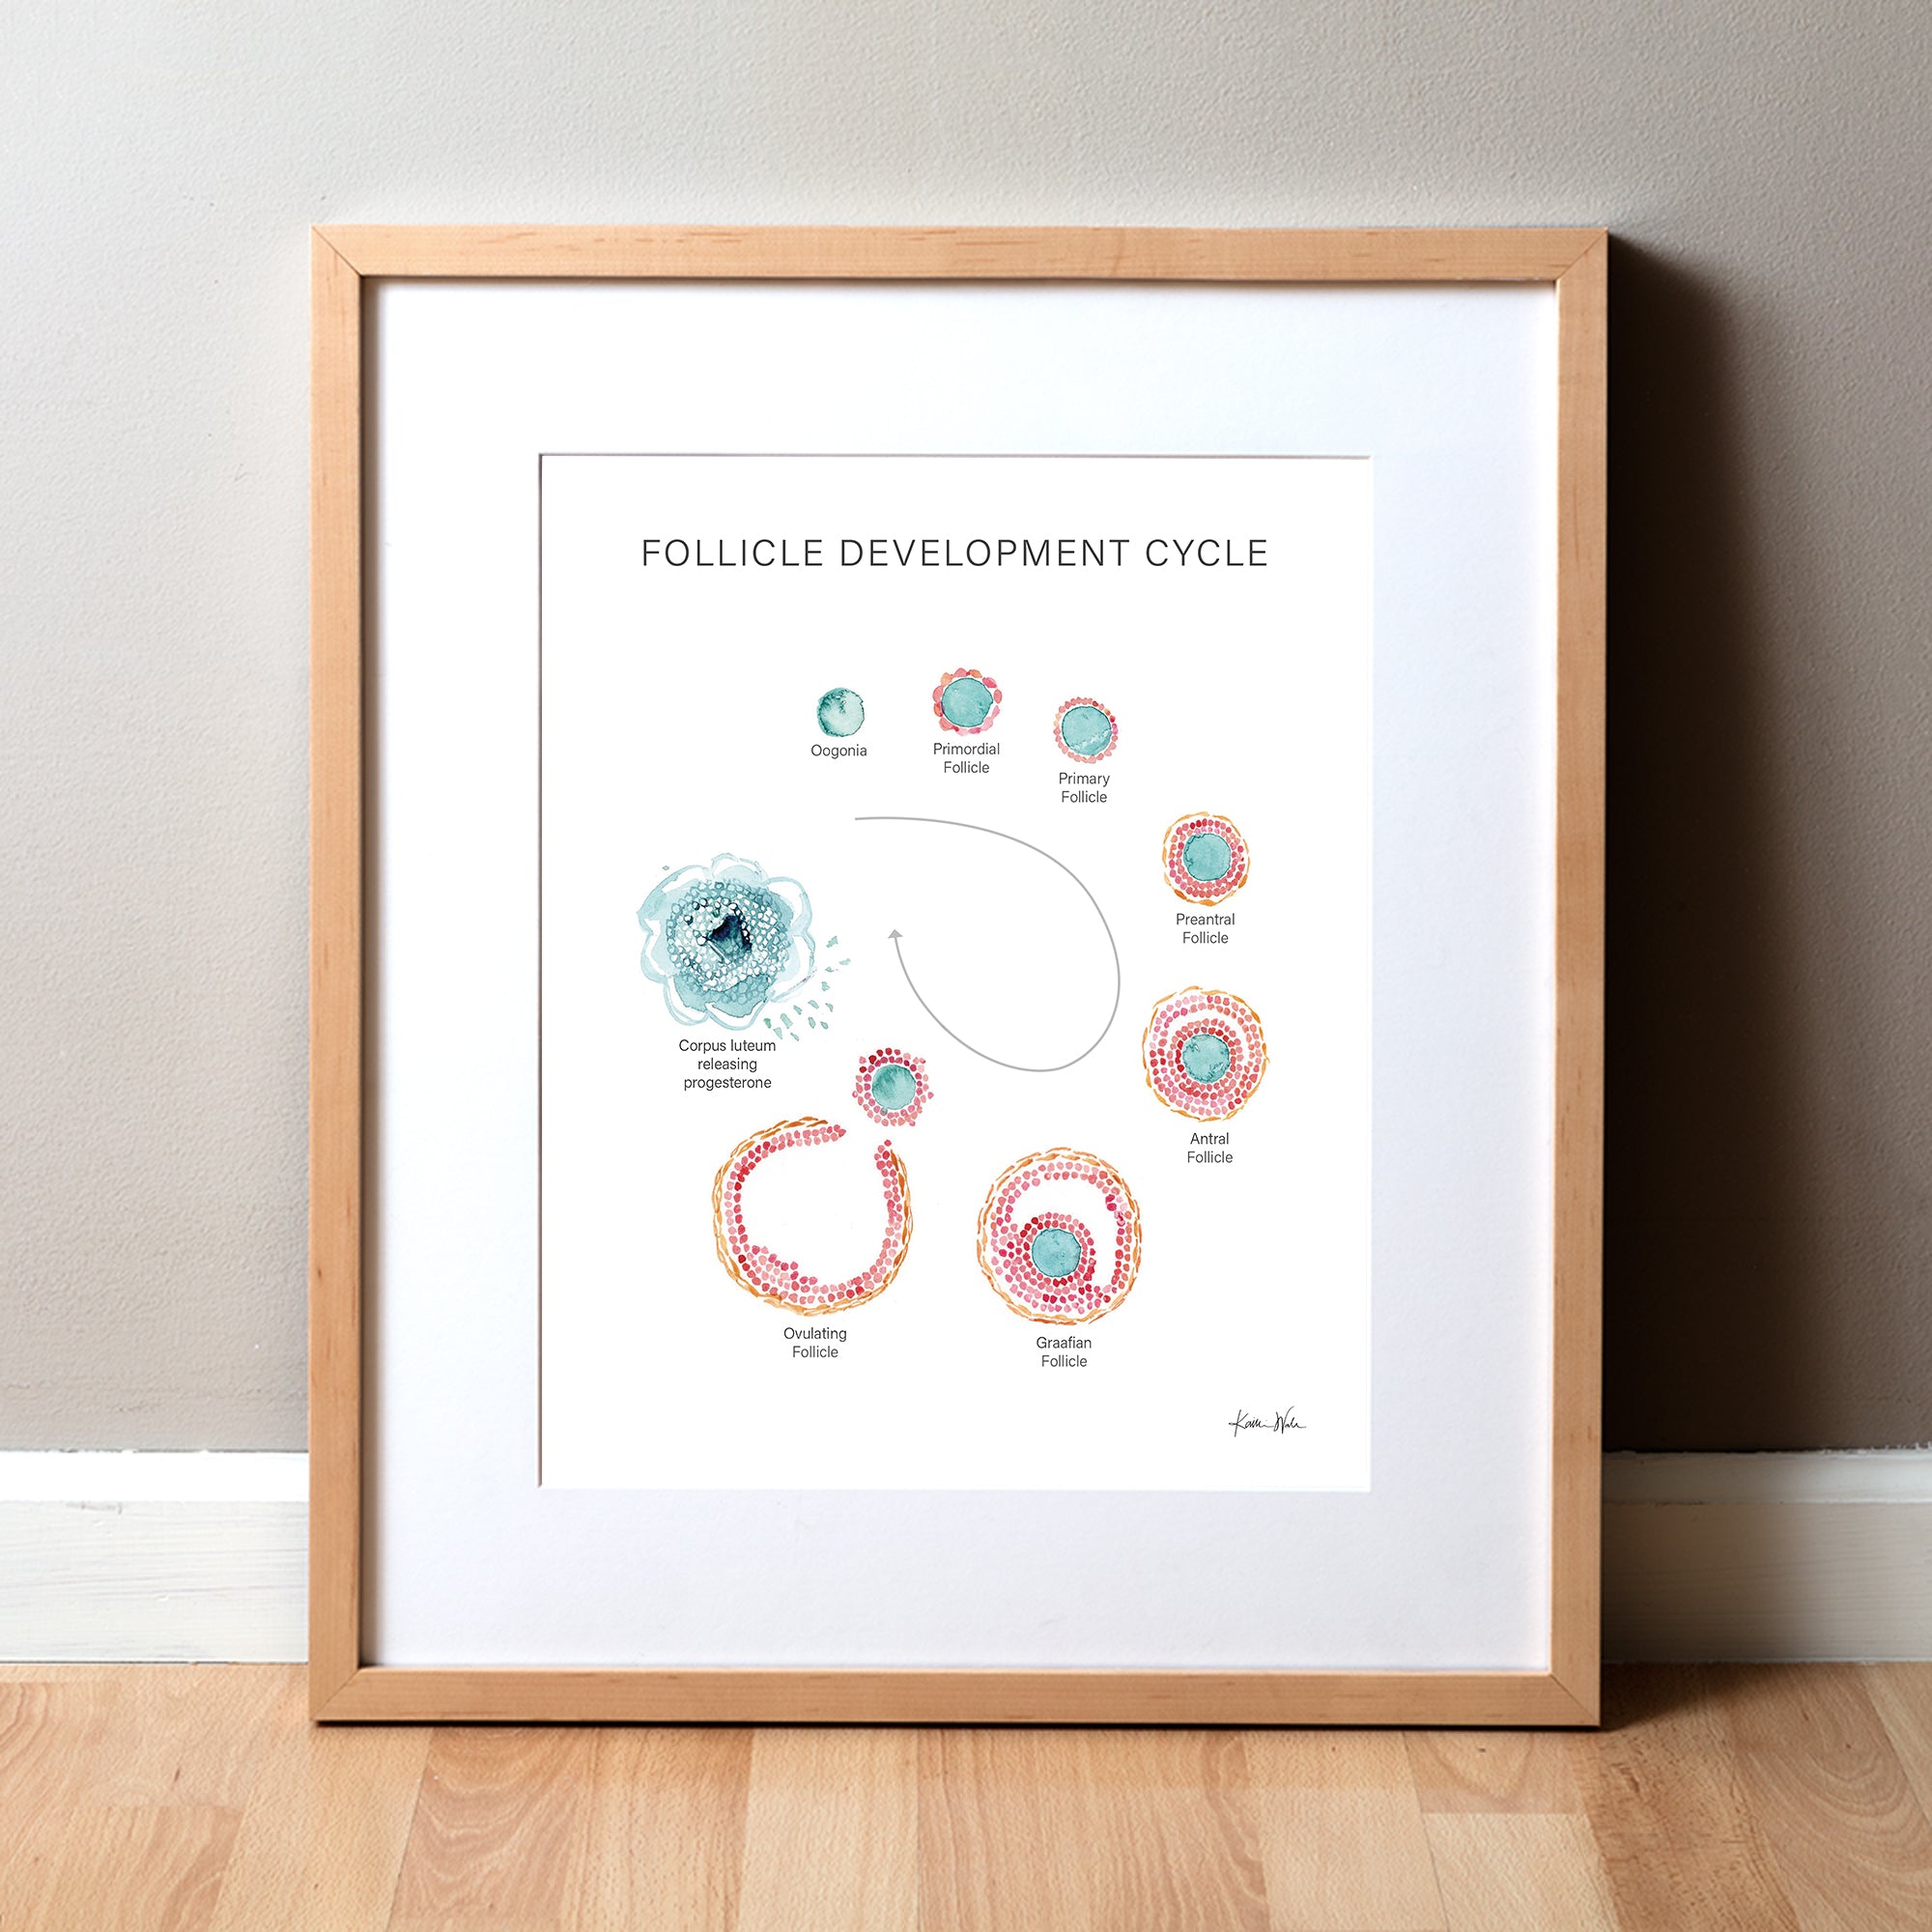 Framed watercolor painting of a follicle development cycle in light teals, pinks and oranges.